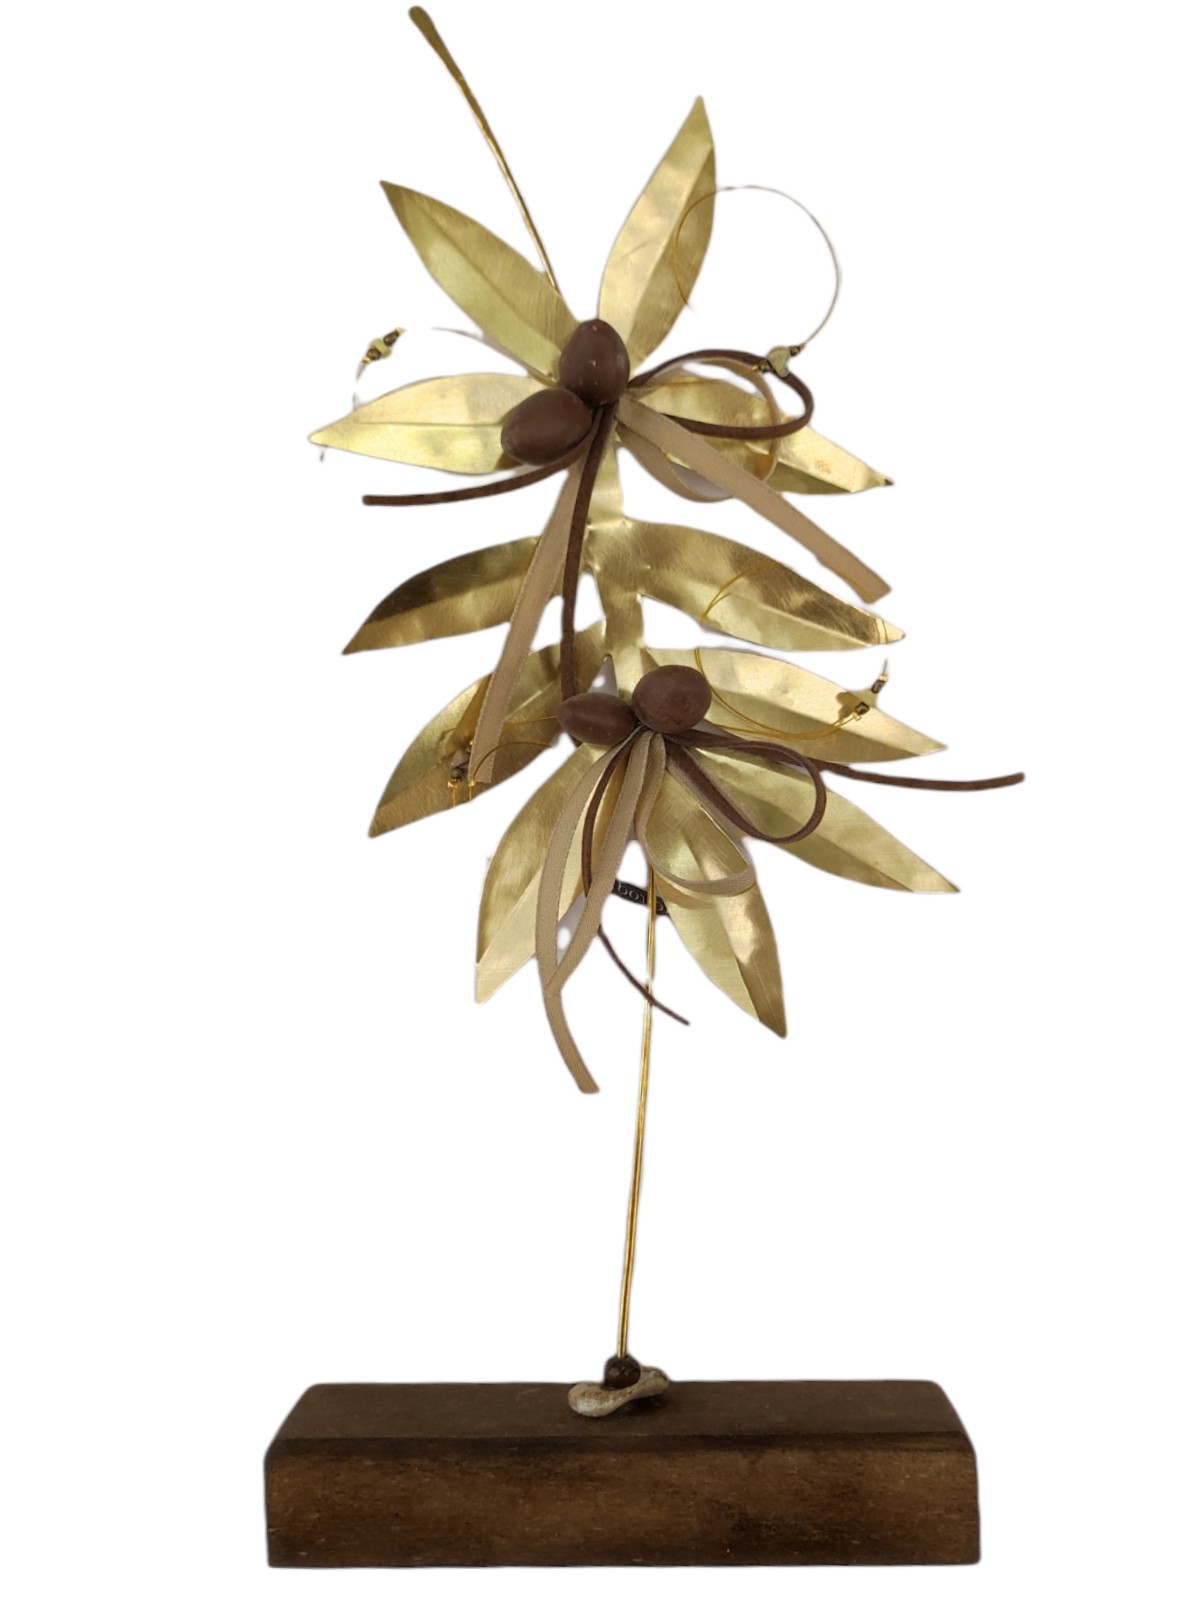 Bronze decorative olive branch on a wooden base